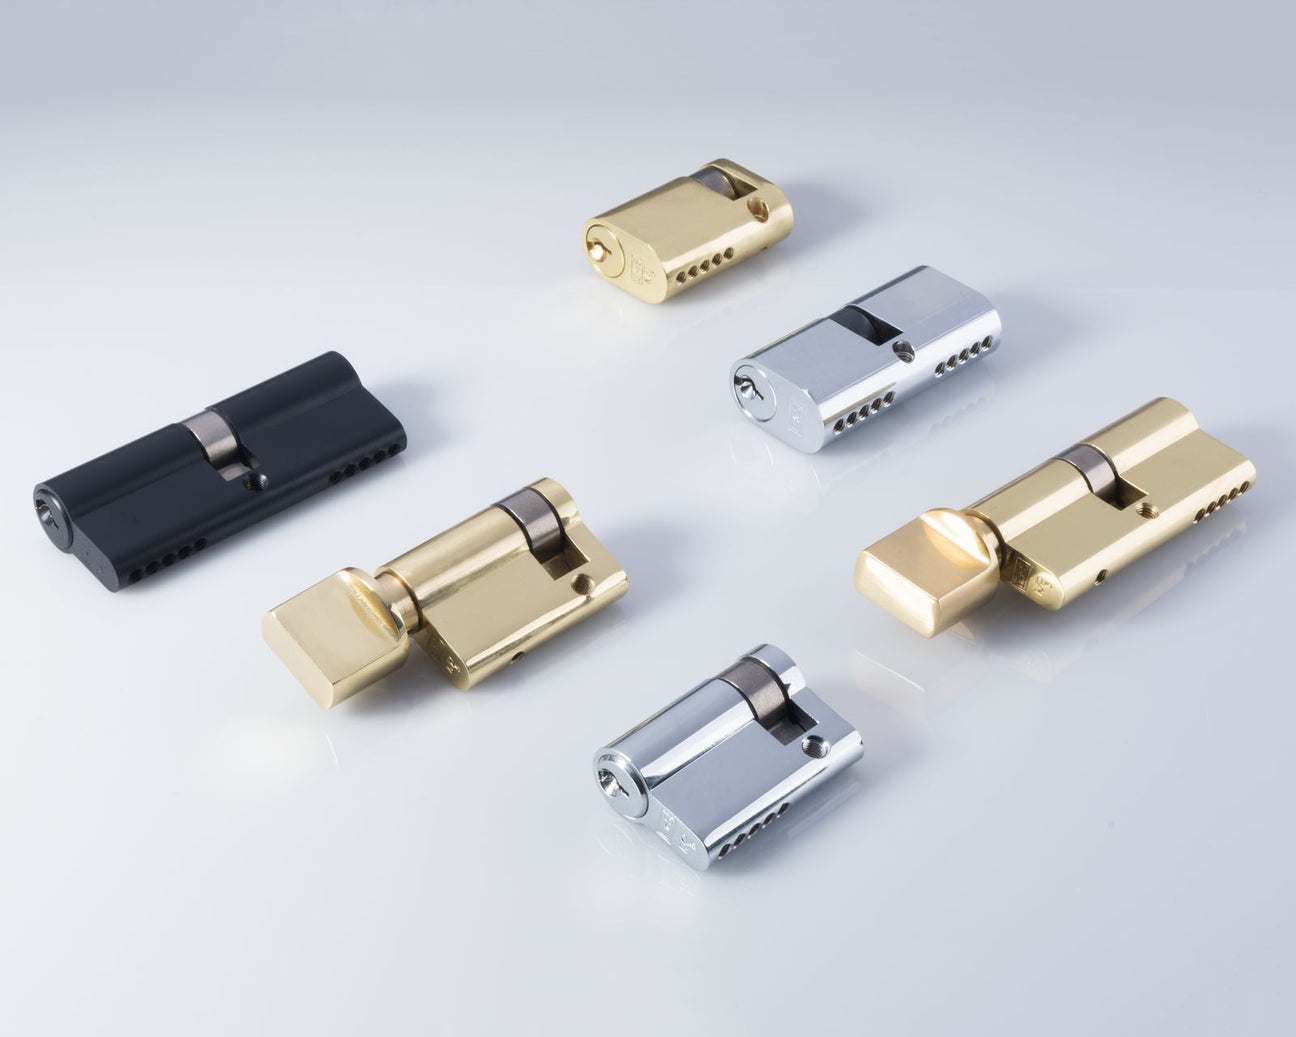 Image showing a range of Euro cylinders made by Carlisle Brass